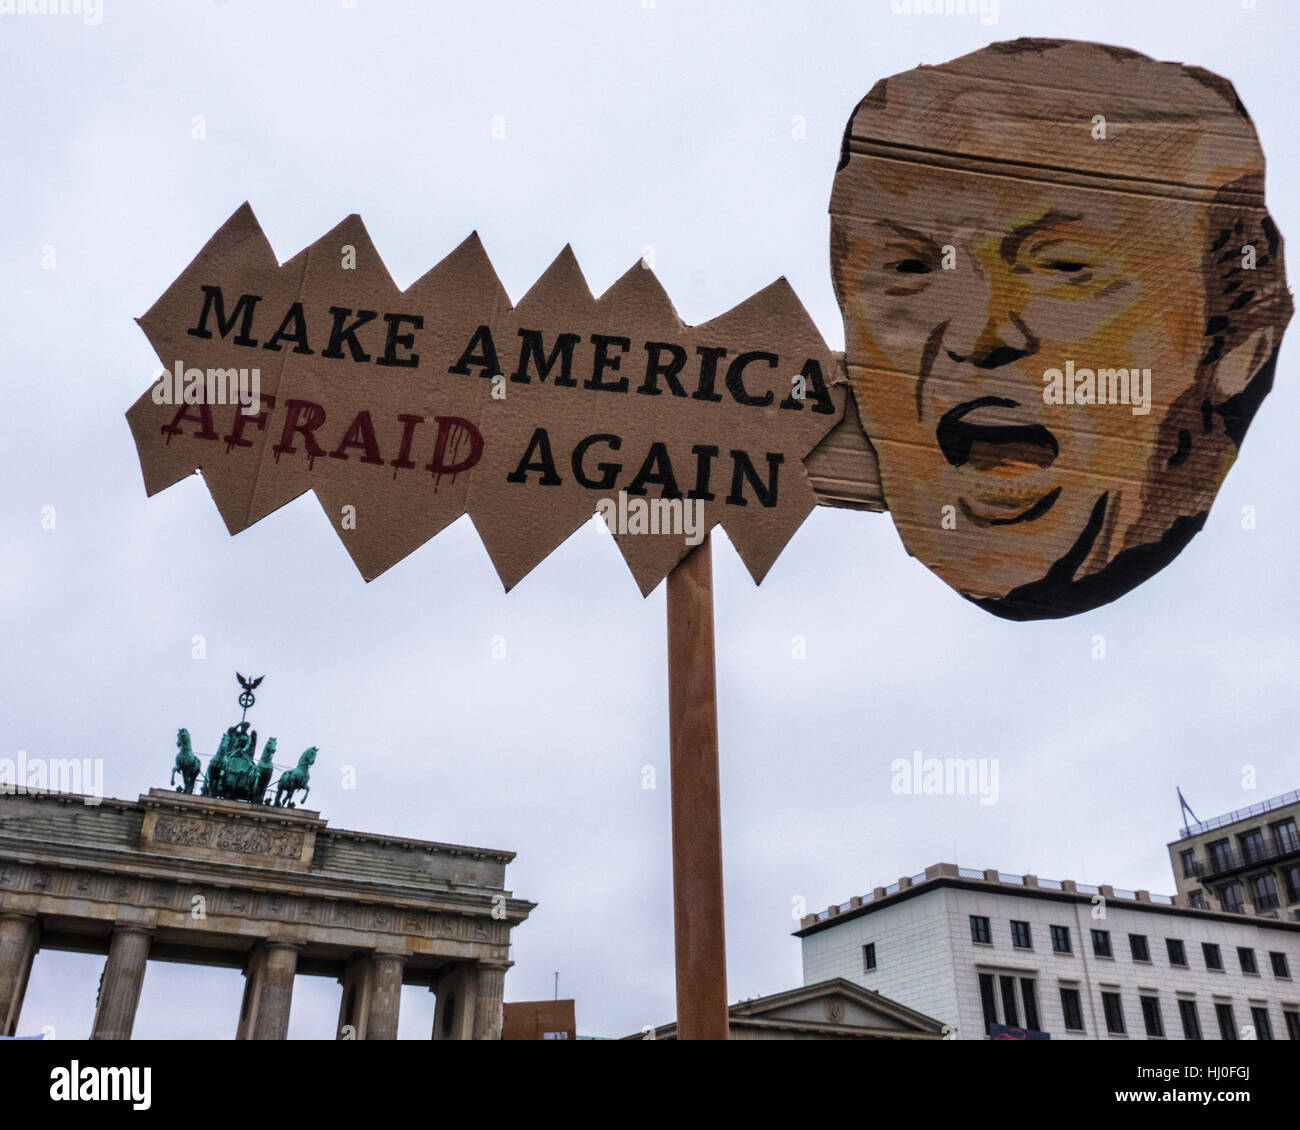 Berlin, Germany, 21st January 2017. Women, Men and Children gathered at the Pariser Platz outside the US Embassy today to protest against the newly inaugurated President, Donald Trump. Protests planned in London, Berlin, Oslo, Toronto and other cities around the world, will express the fear that Donald Trump poses a threat to human and civil rights. Eden Breitz/Alamy Live News Stock Photo